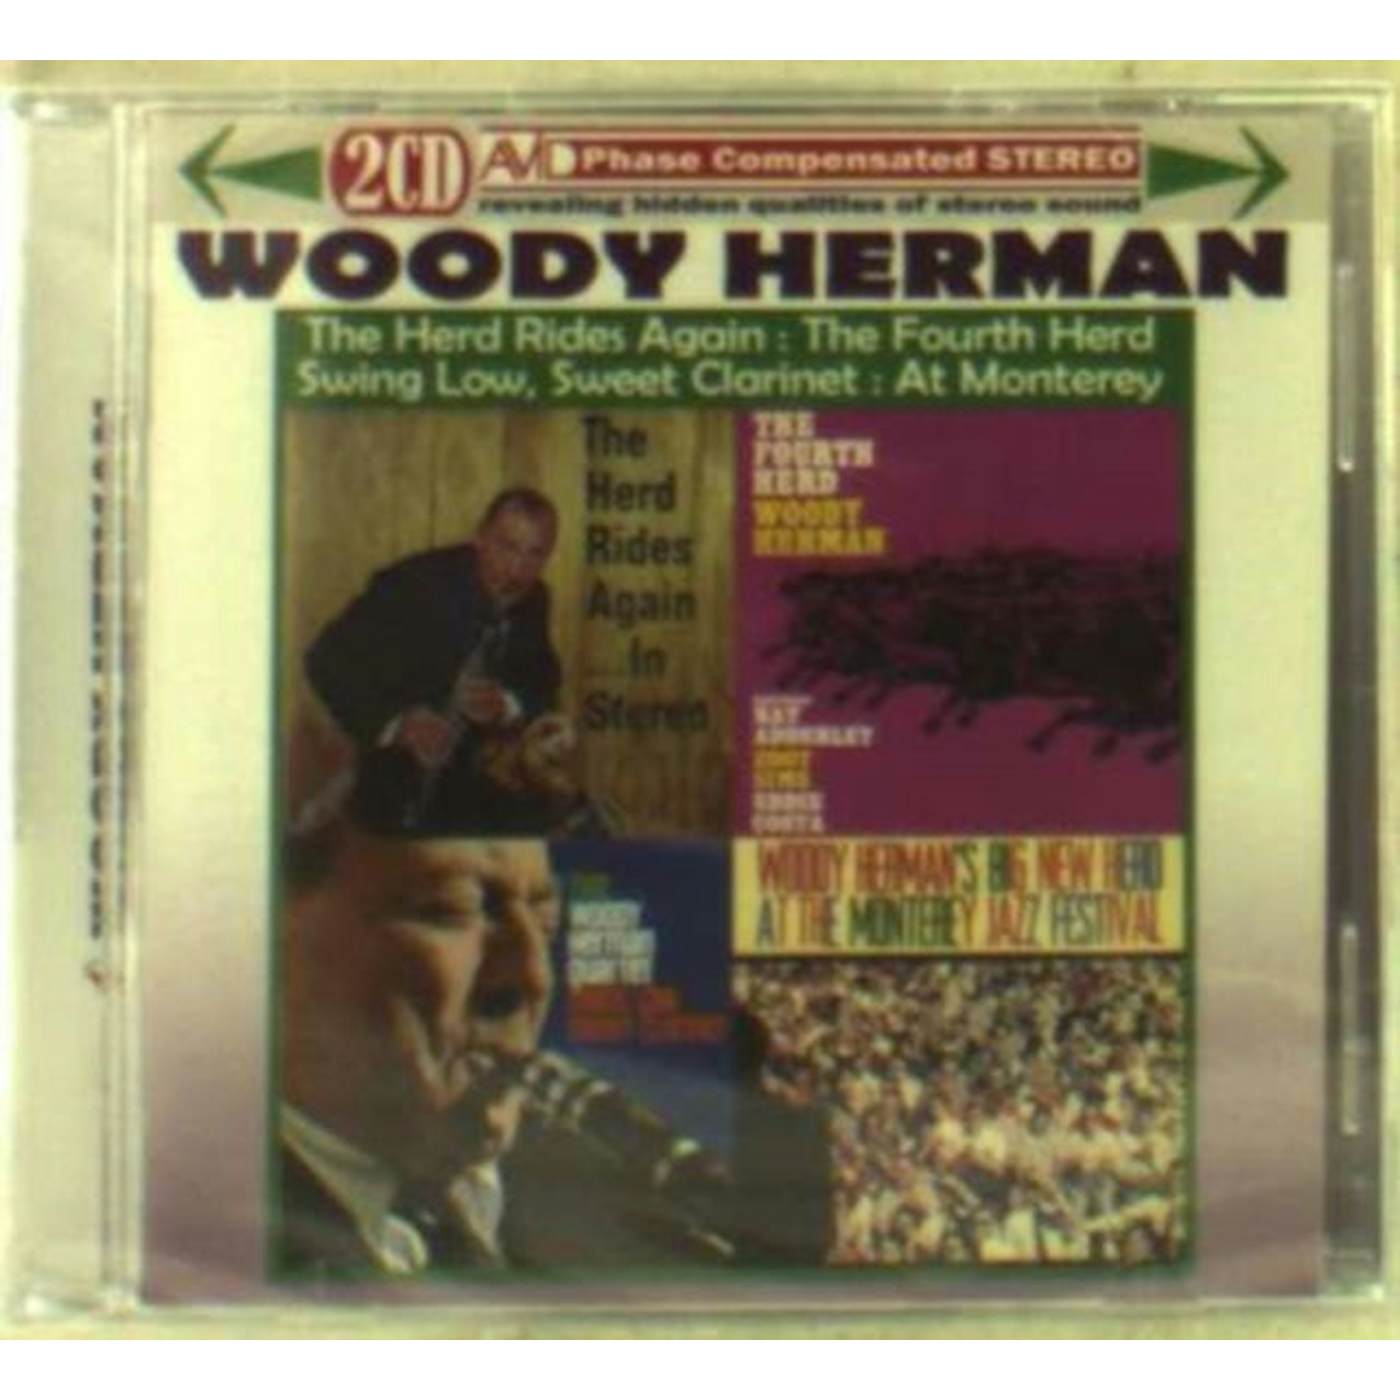 Woody Herman CD - Four Classic Albums (The Herd Rides Again In Stereo / The Fourth Herd / Swing Low. Sweet Clarinet / At The Monterey Jazz Festival)